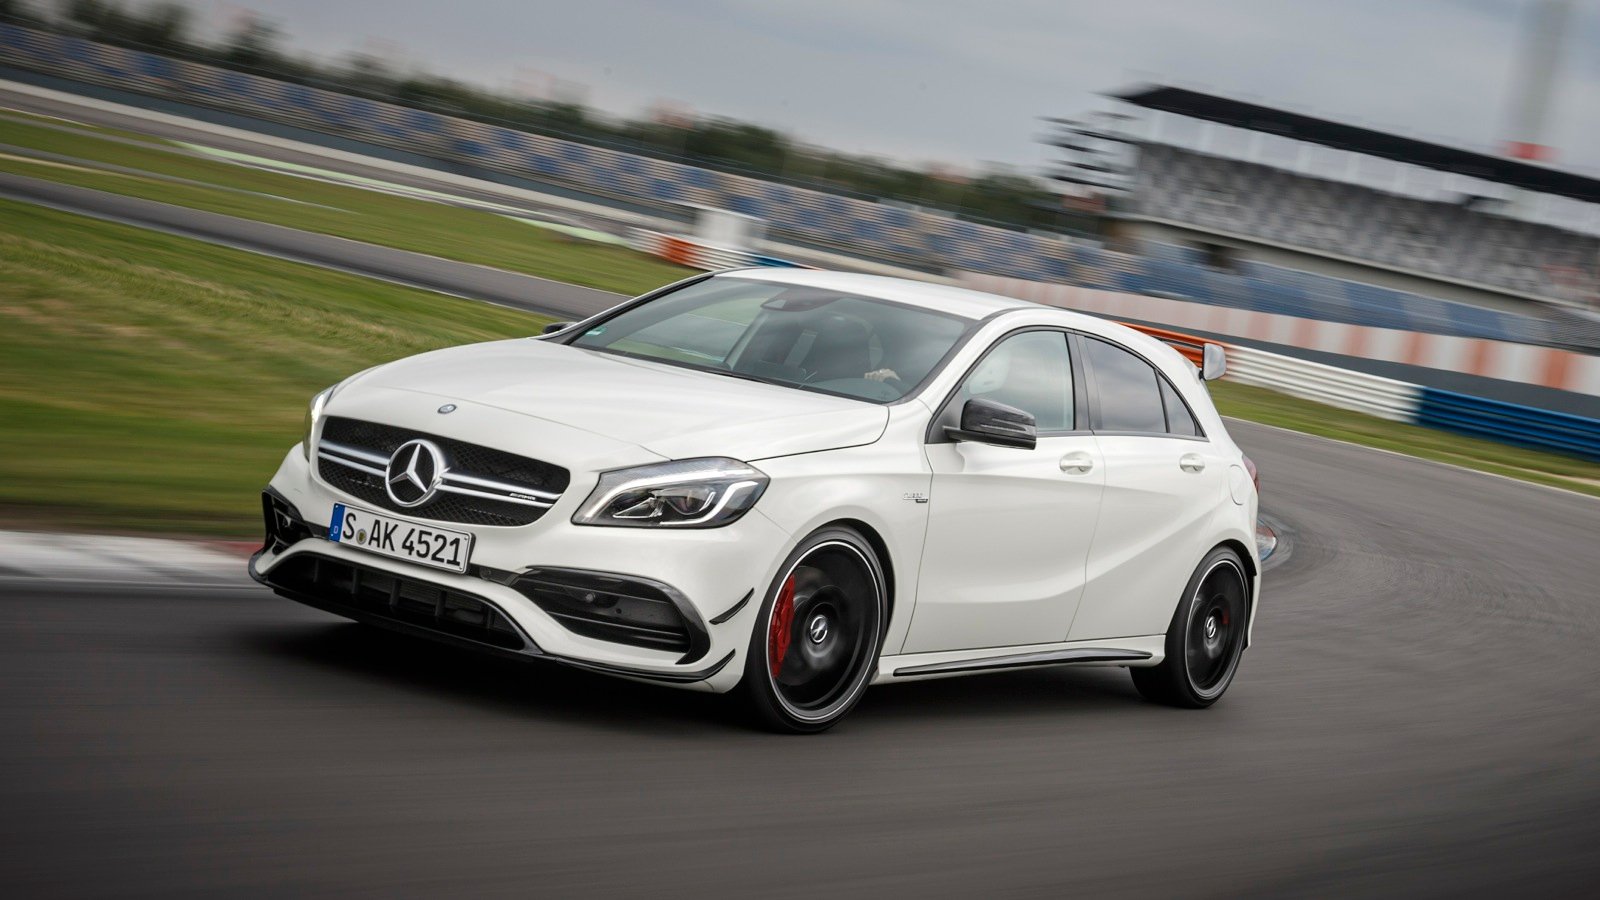 2016 Mercedes-AMG A45 4Matic Review: Track test | CarAdvice